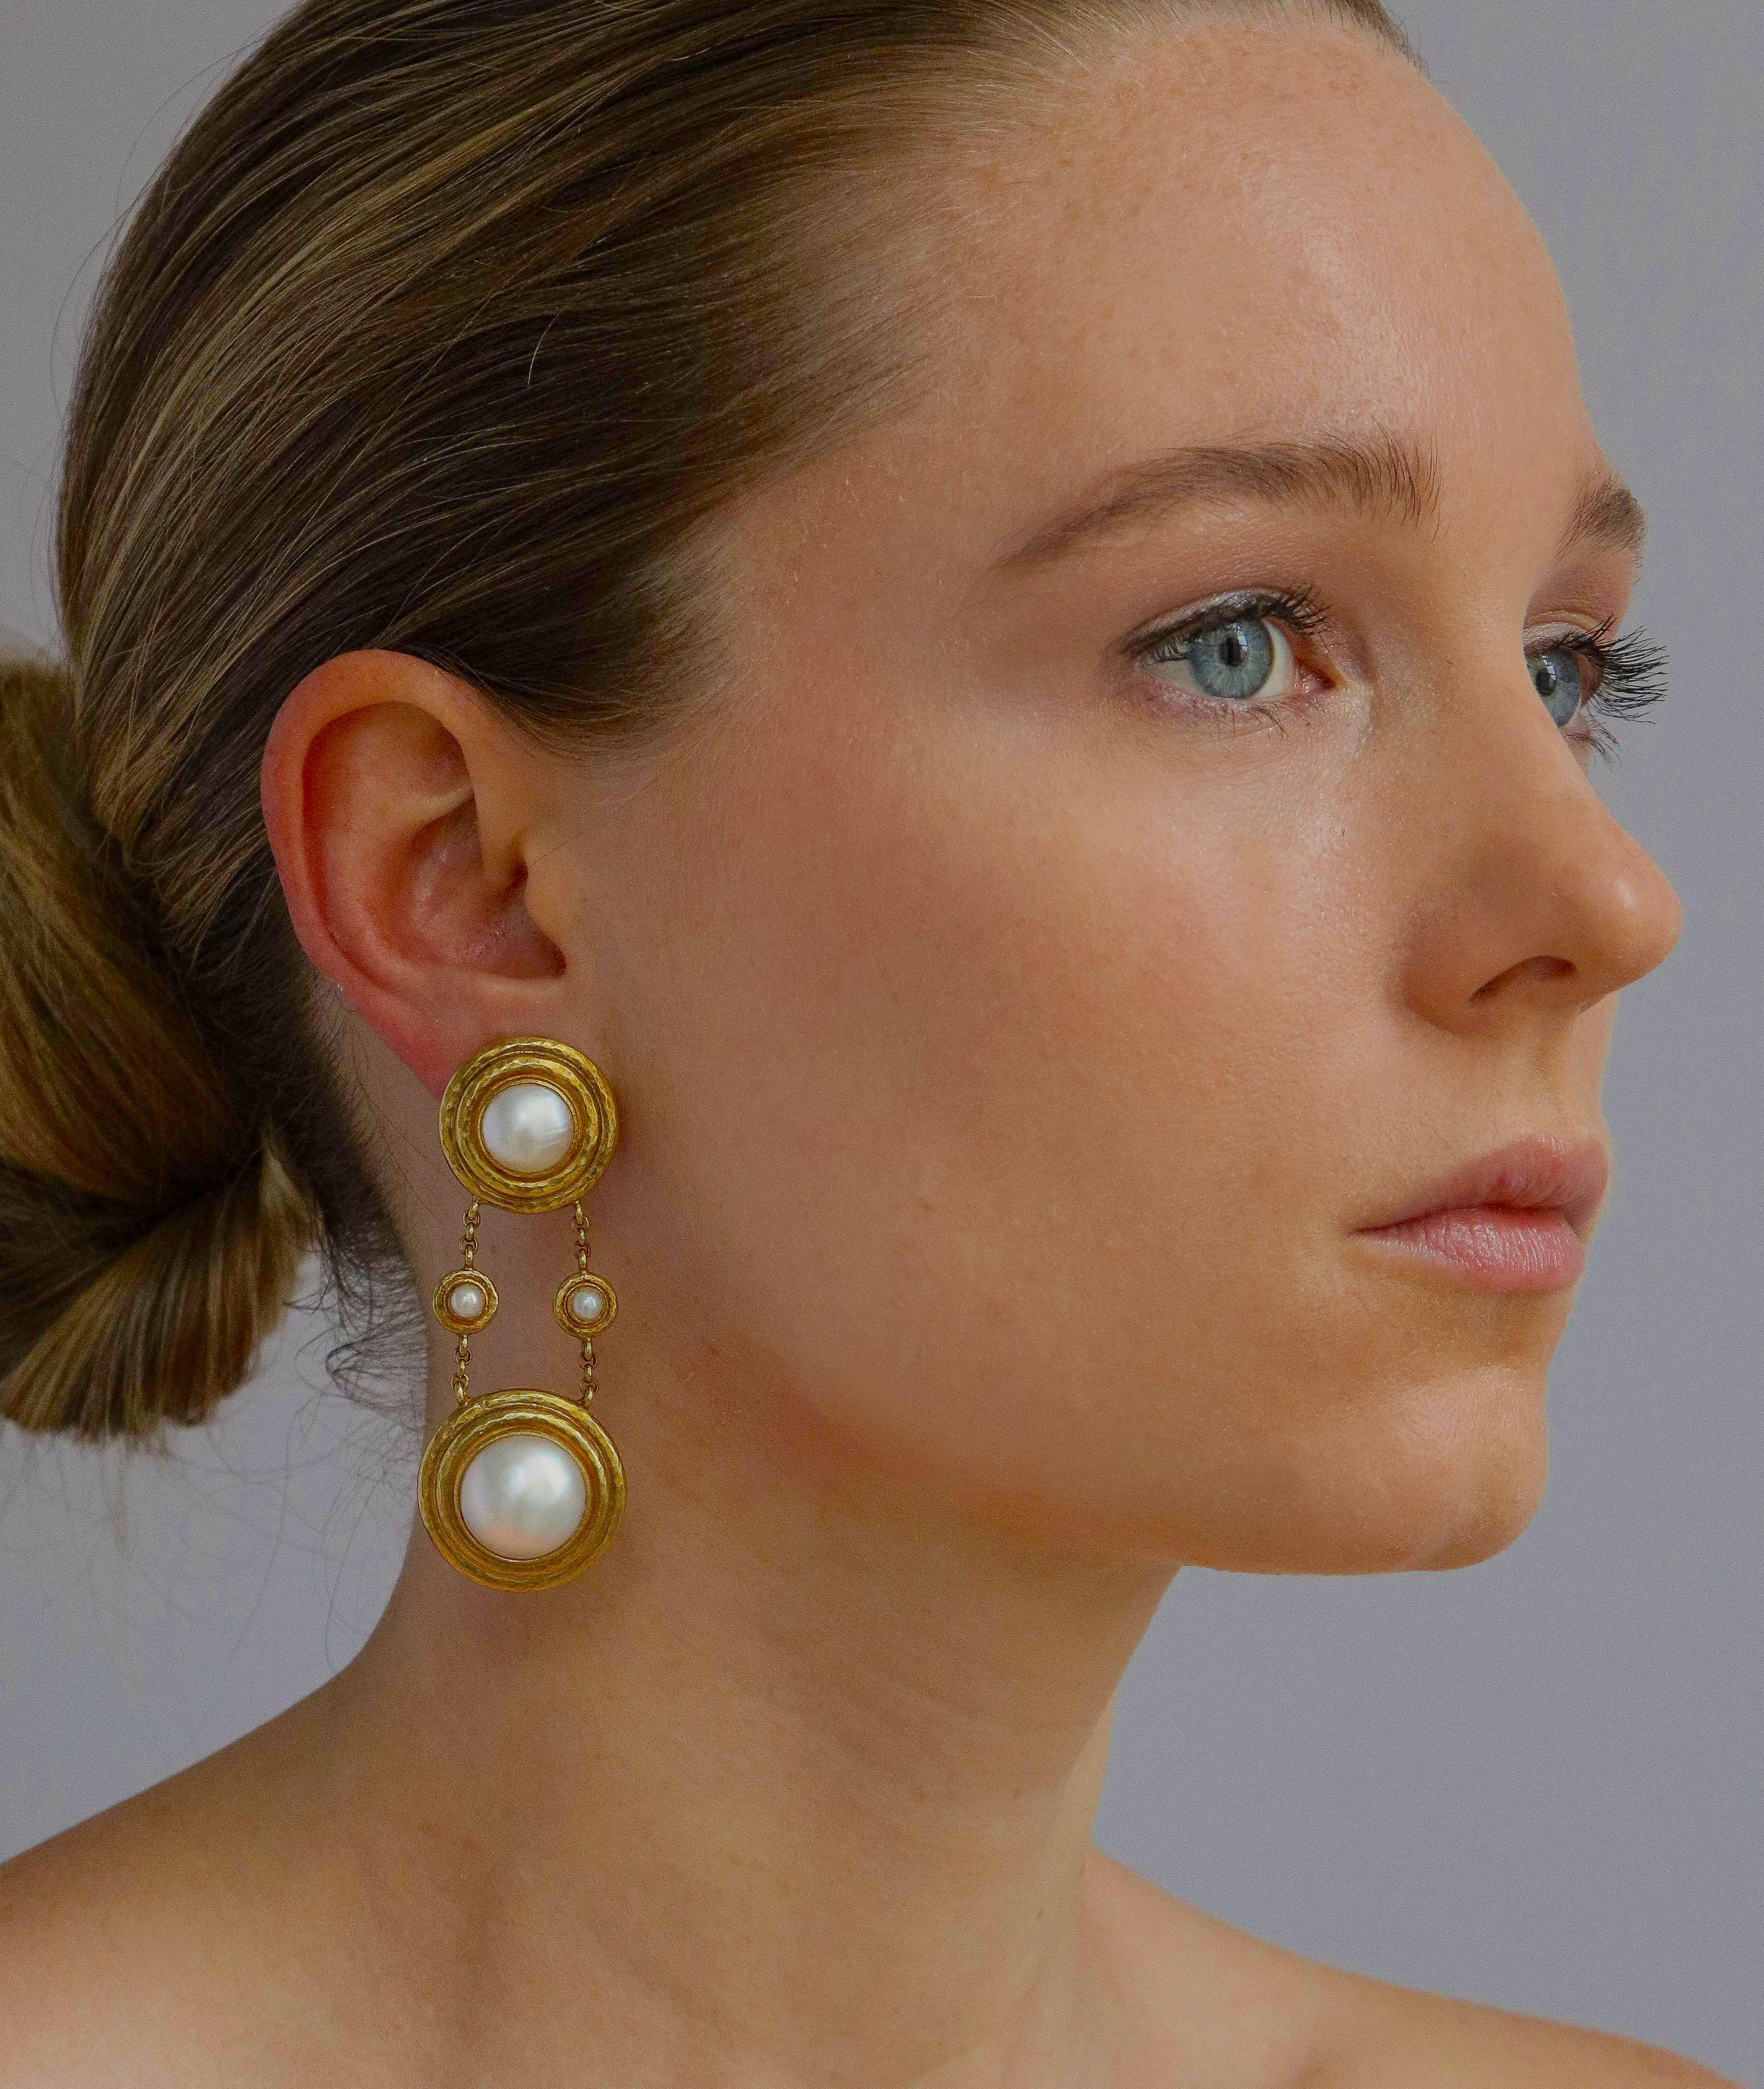 Elegant and fashionably long Elizabeth Locke ear clips of 18K gold set with lustrous mabe pearls both youthful and sophisticated with a hinged post for an added pierced option. The top pearl measuring 3/4 inch diameter and the lower 1 inch with a